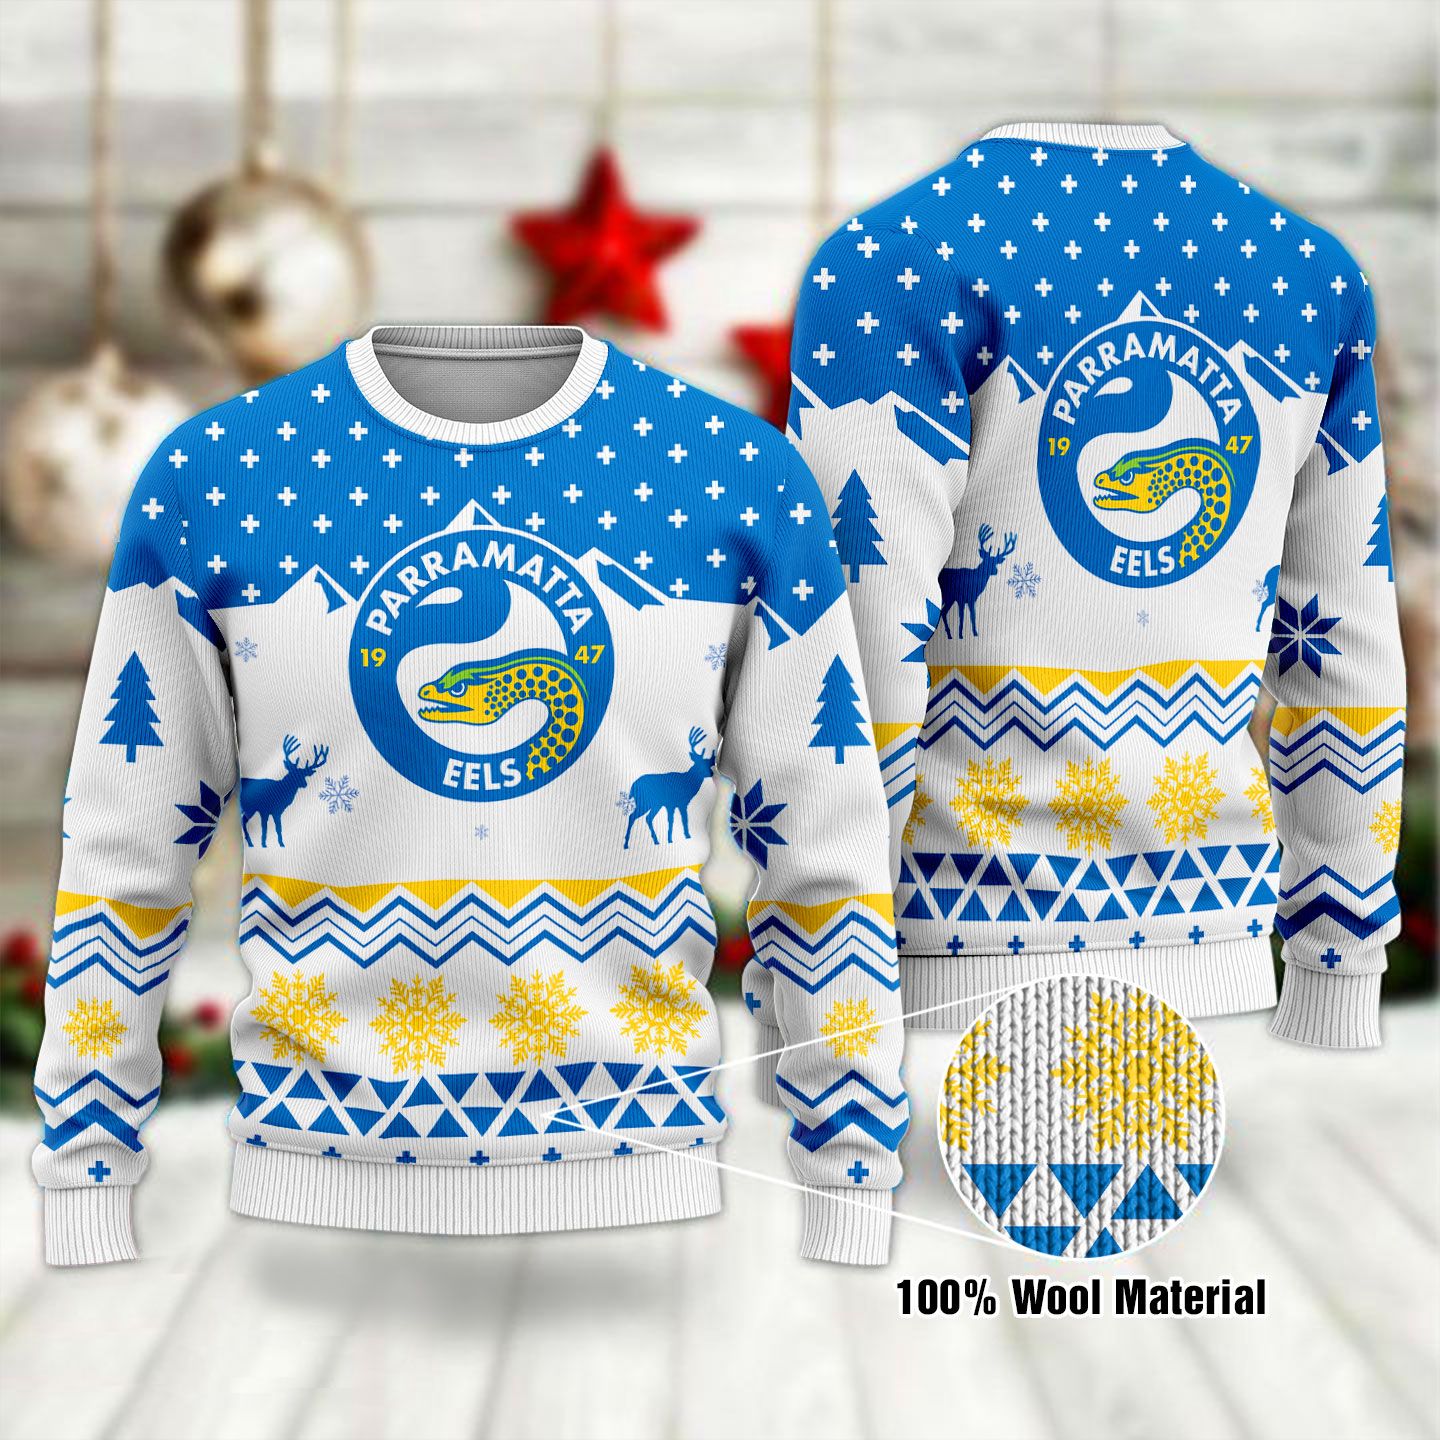 Middily- Parramatta Eels AFL - Ugly Xmas Sweater,Holiday 2021 Sweater,Secret Santa,Christmas Sweater Gift,Gag Gift - 3D Sweater